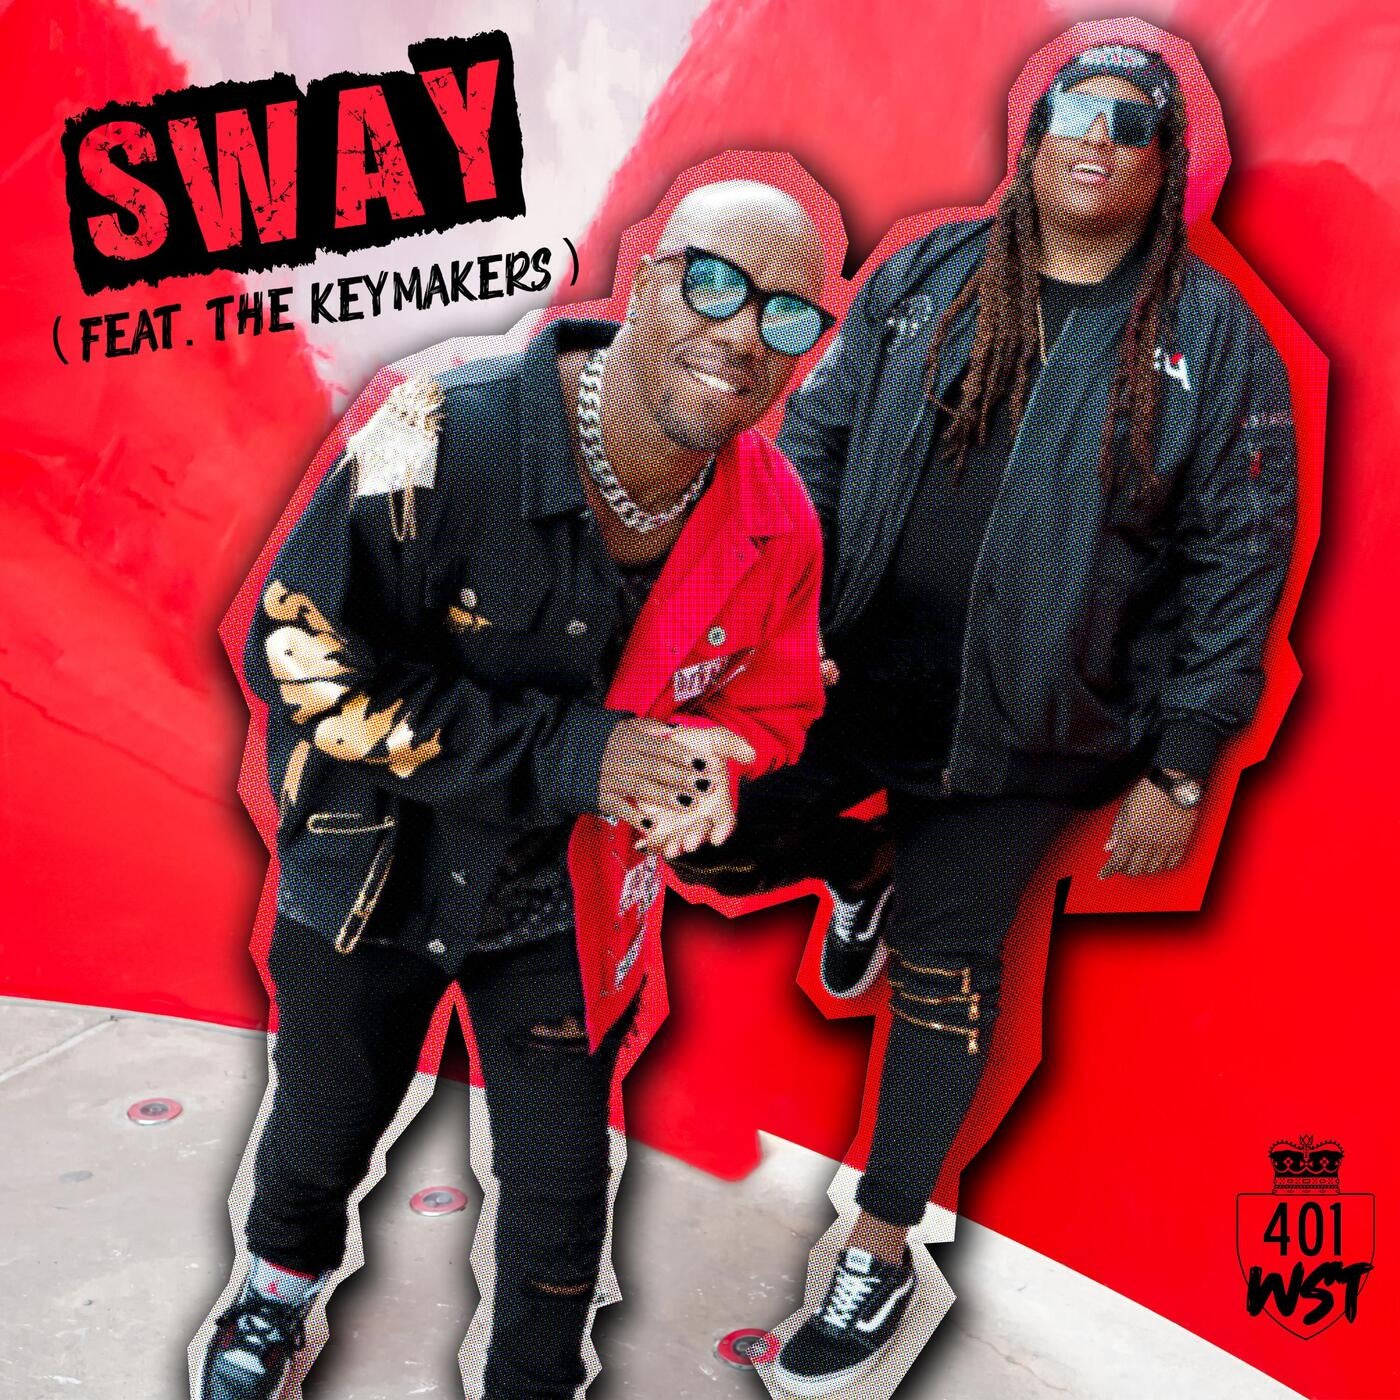 Sway (feat. The Keymakers)